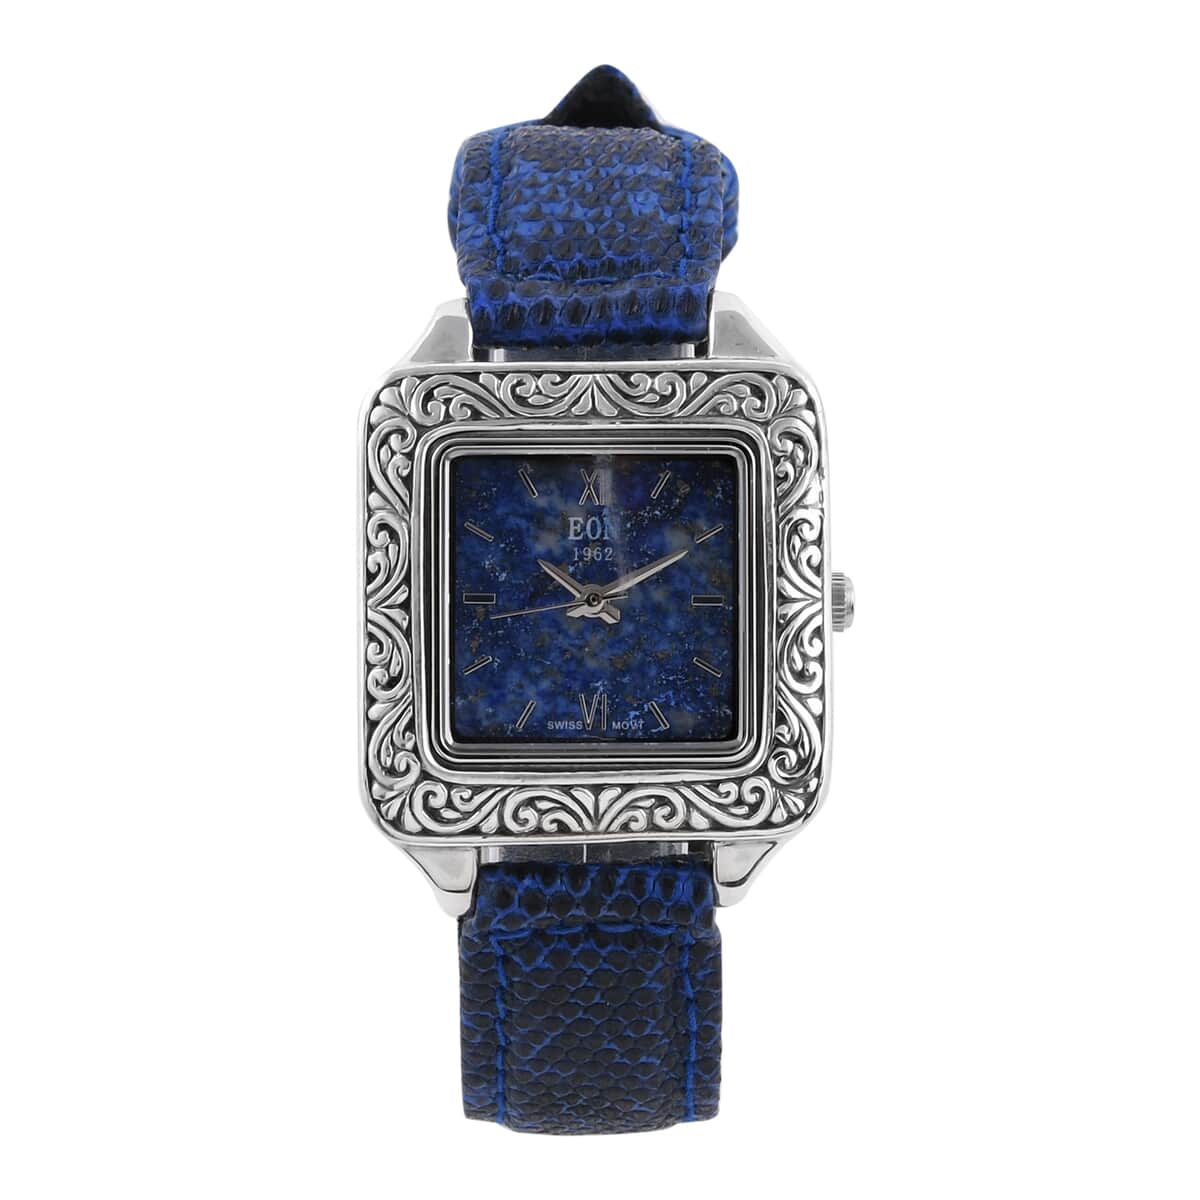 BALI LEGACY EON 1962 Lapis Lazuli Swiss Movement Watch in Sterling Silver and Stainless Steel with Royal Blue Lizard Color Leather Strap (20 g) image number 0